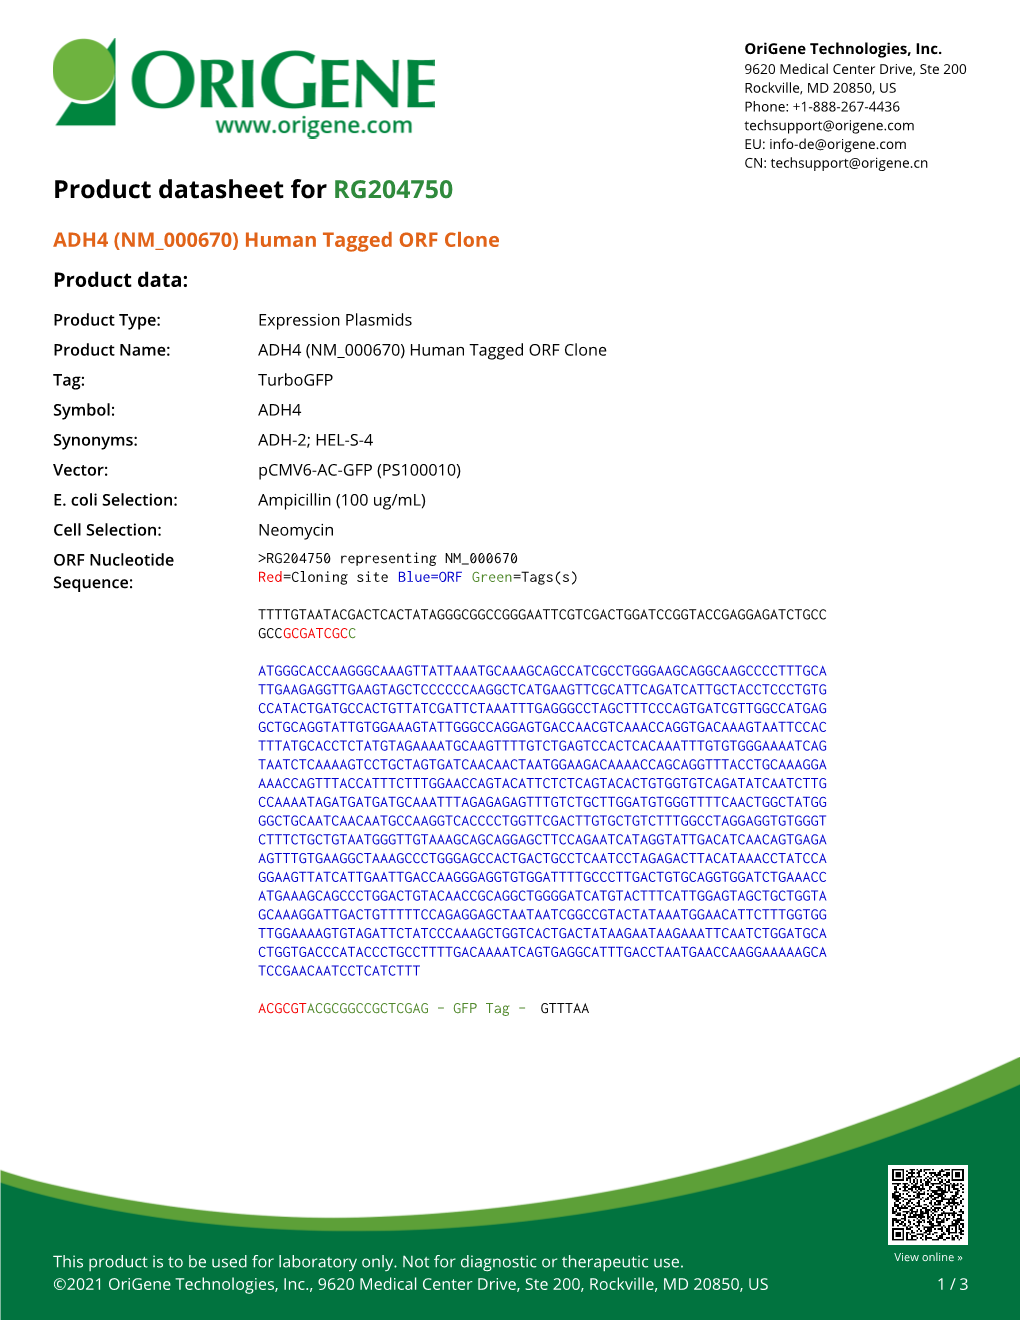 ADH4 (NM 000670) Human Tagged ORF Clone Product Data